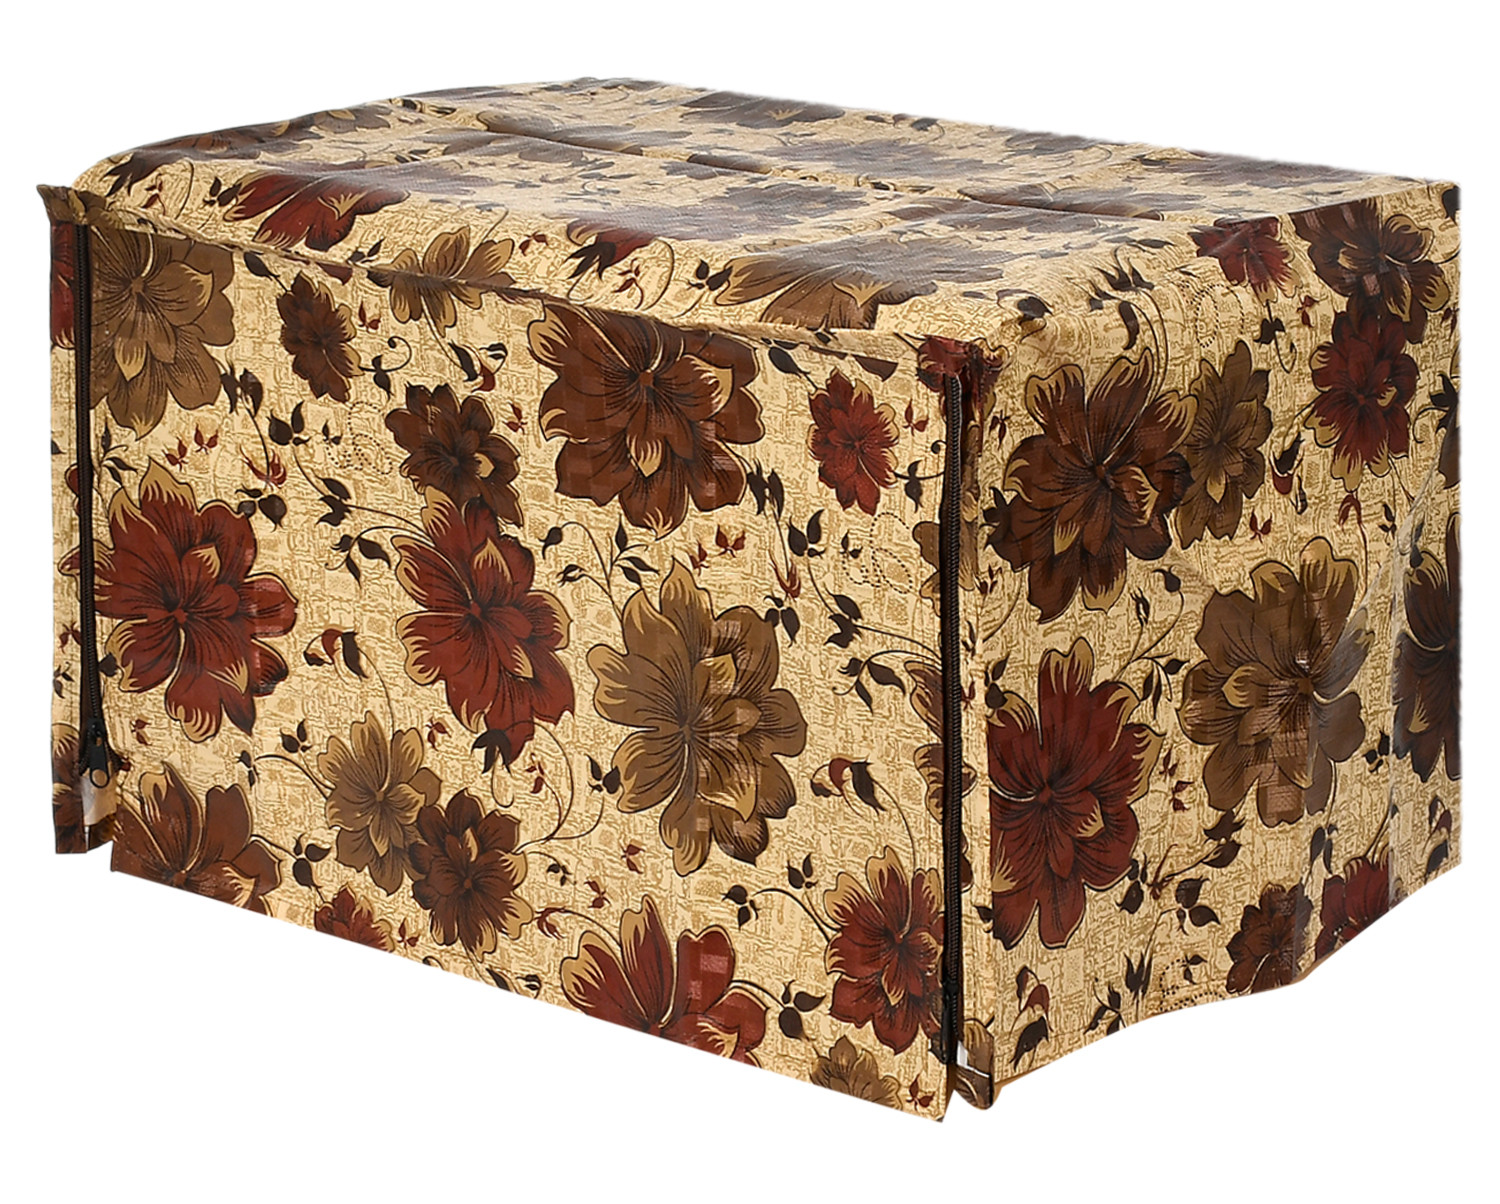 Kuber Industries PVC Flower Printed Microwave Oven Cover, Dustproof Machine Protector Cover,23 Ltr. (Brown)